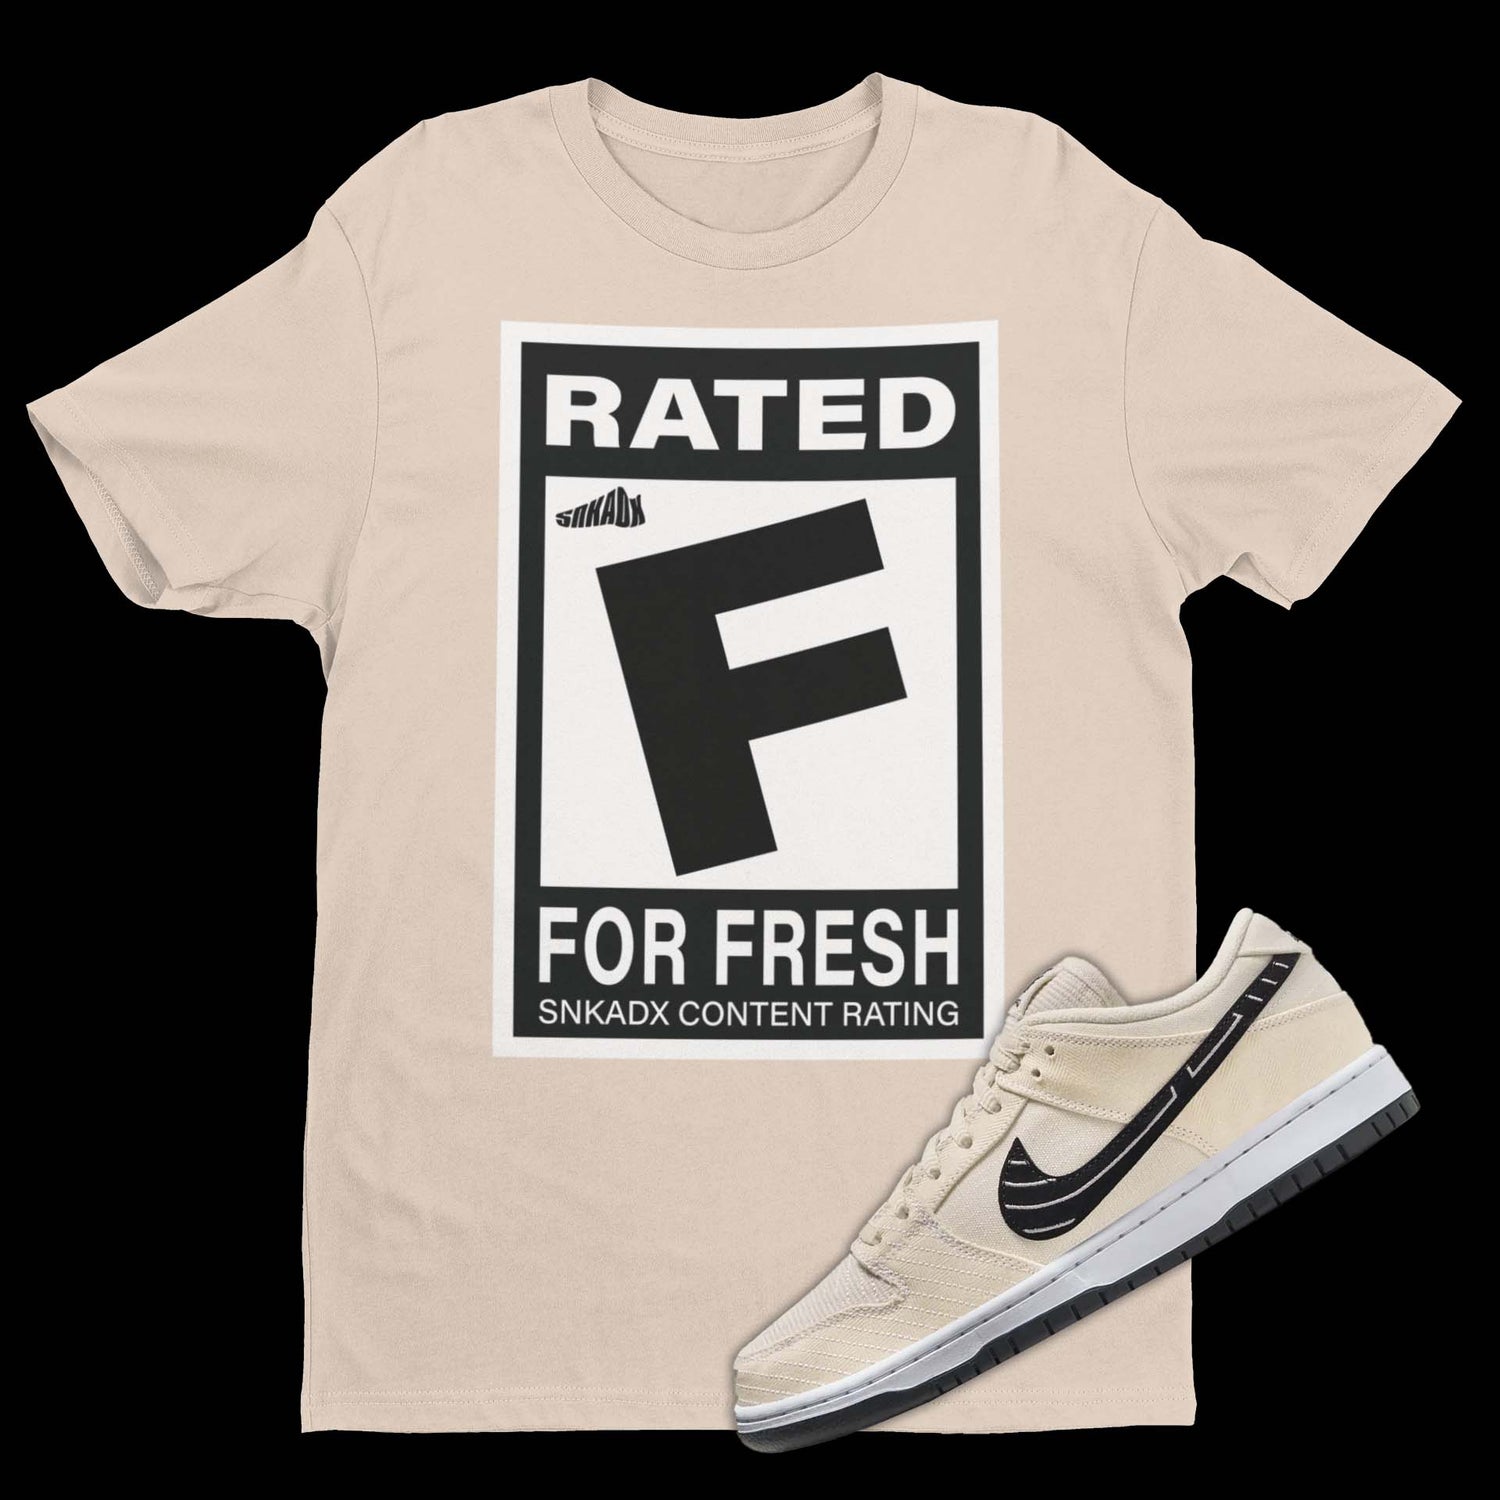 Stay stylish with the Rated F For Fresh Nike Albino & Preto Matching T-Shirt from SNKADX. 